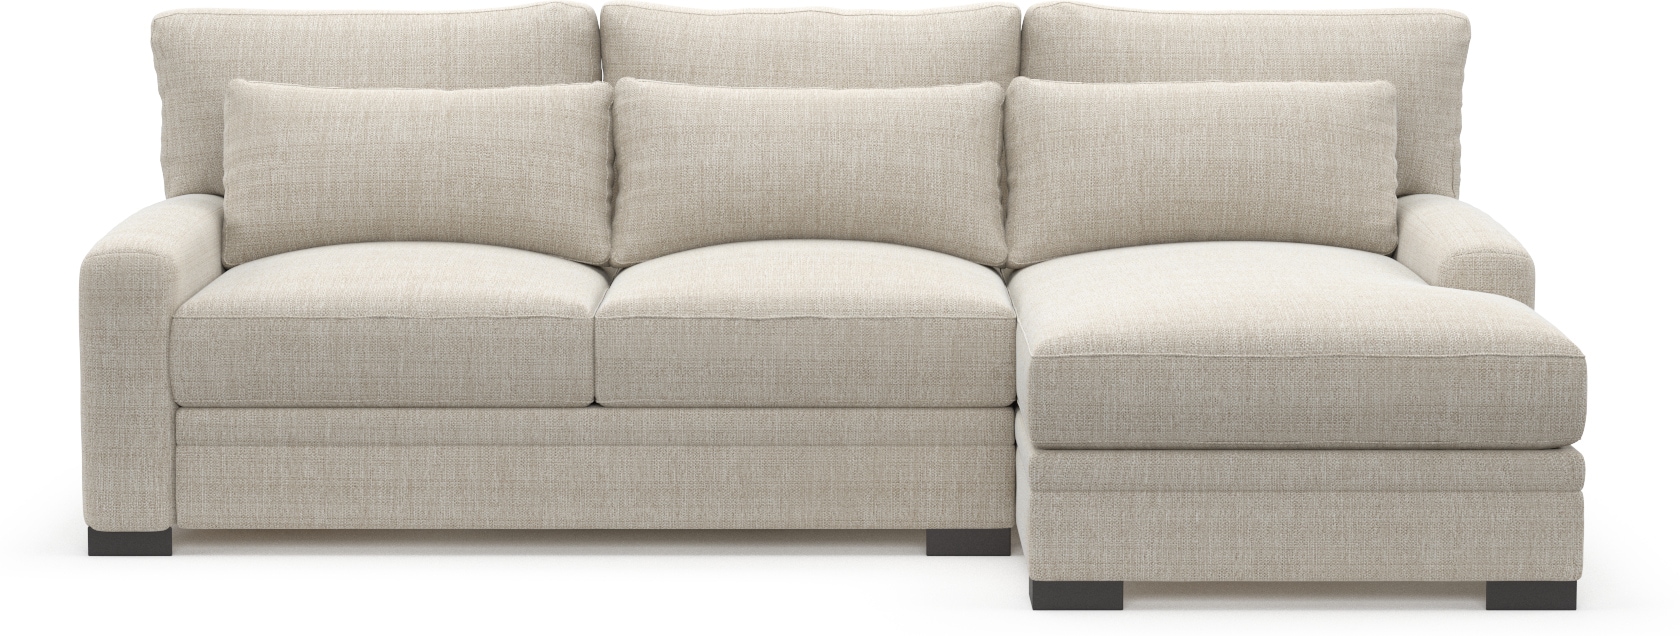 Winston 2 Piece Sectional With Chaise